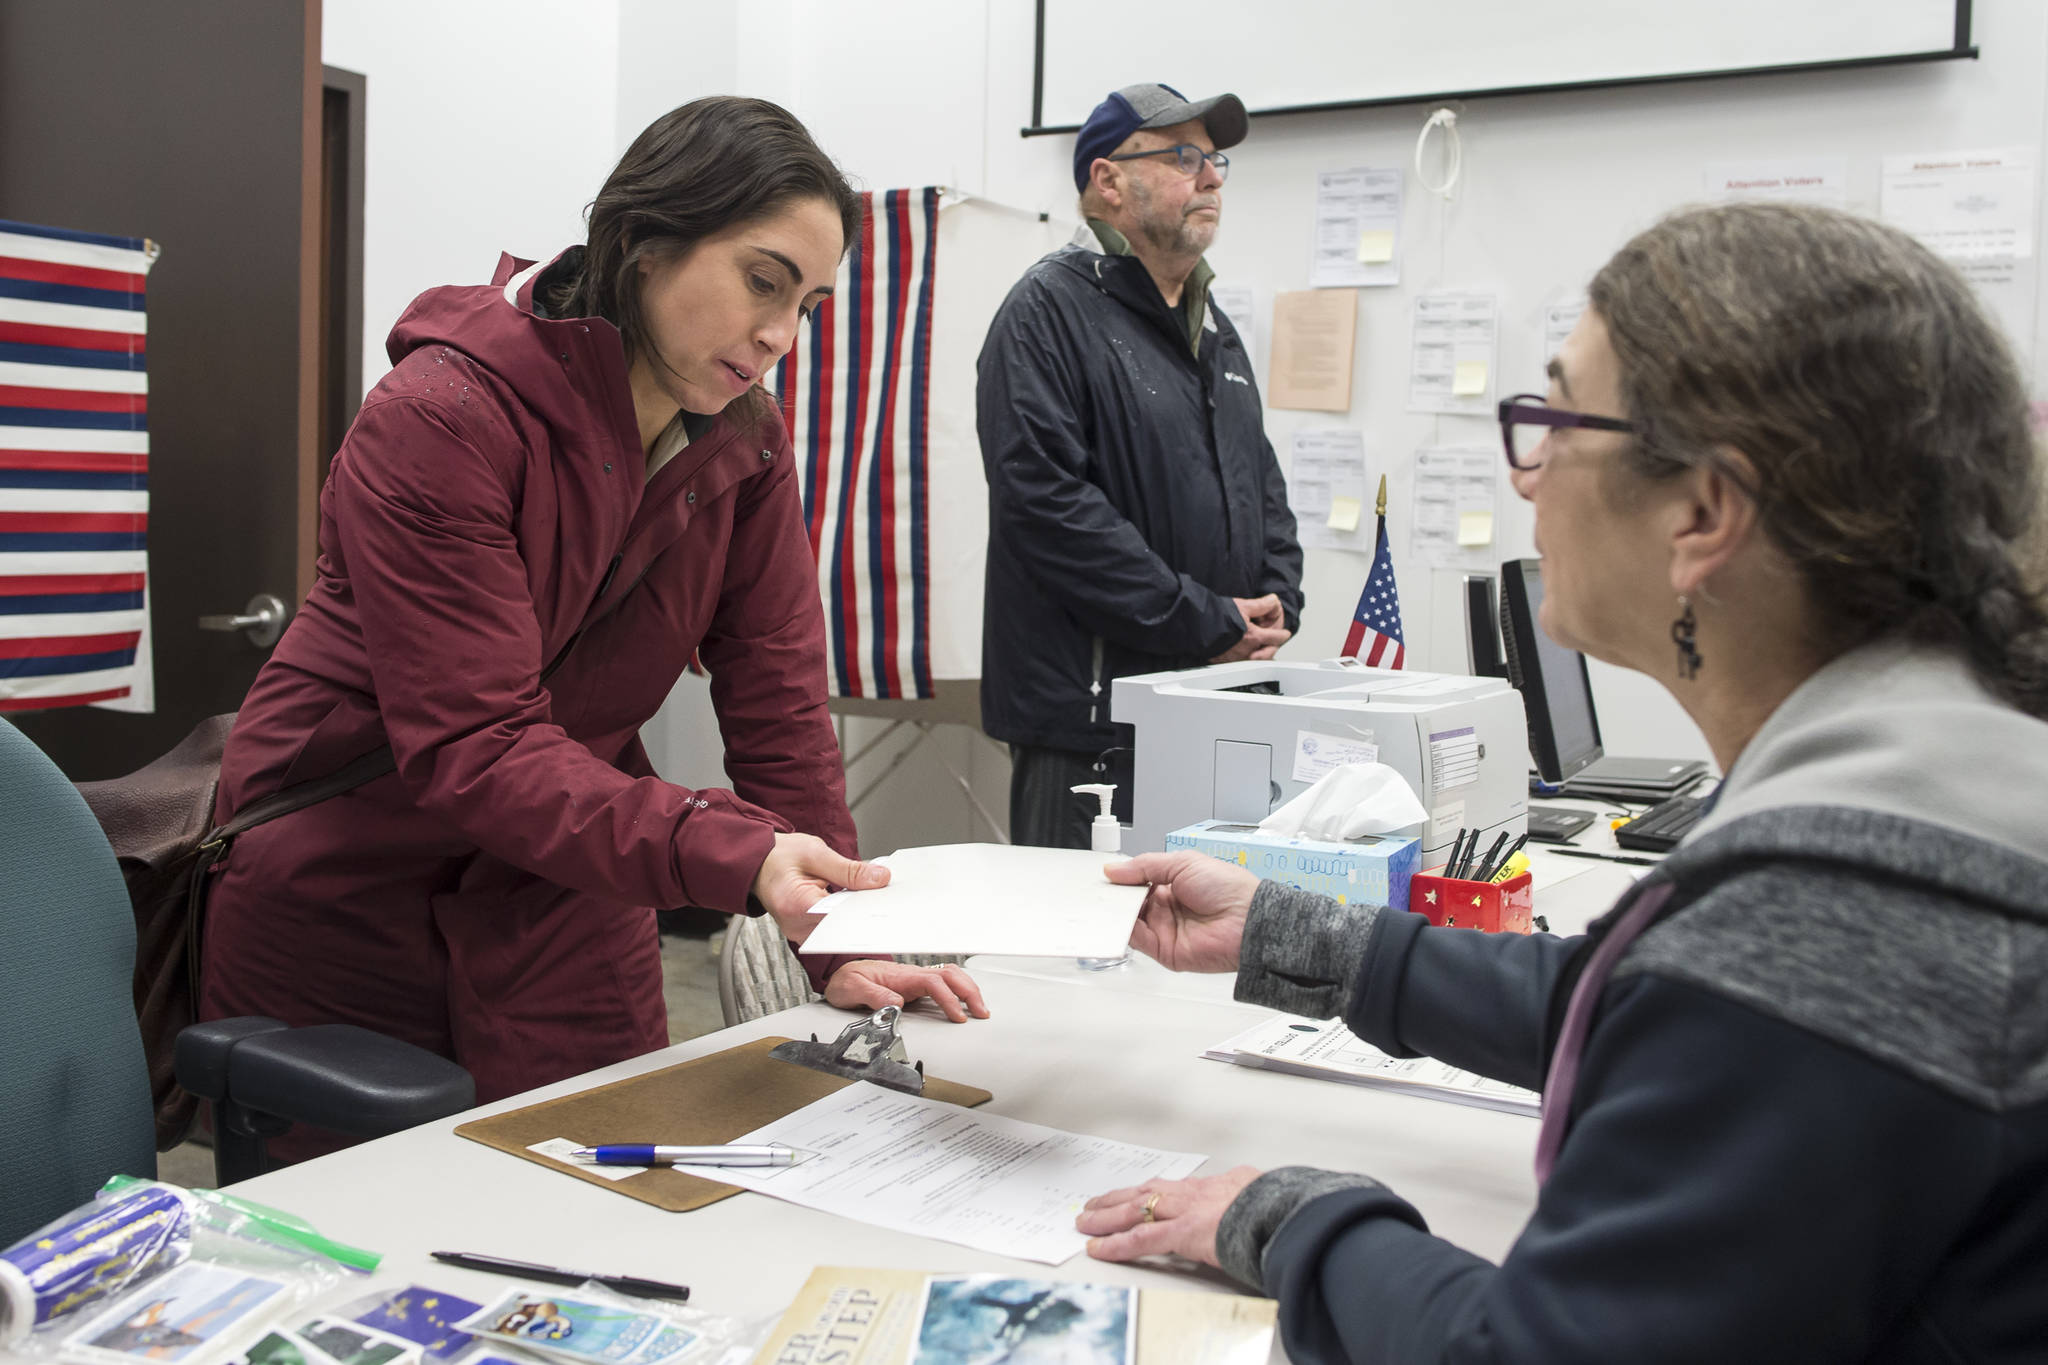 Libby Bakalar, left, receives her ballot from election official Tami Burgett, right, as Michael Grubbs waits during early voting at the State Office Building on Monday, Oct. 22, 2018. Voting is on the 8th floor of the State Office Building from 8 a.m.-5 p.m., Monday-Friday. The Elections Office in the Mendenhall Mall Annex is also open for voting during the same times plus Saturday, Nov. 3, 10 a.m.-4 p.m., and Sunday, Nov. 4, noon-4 p.m. (Michael Penn | Juneau Empire)